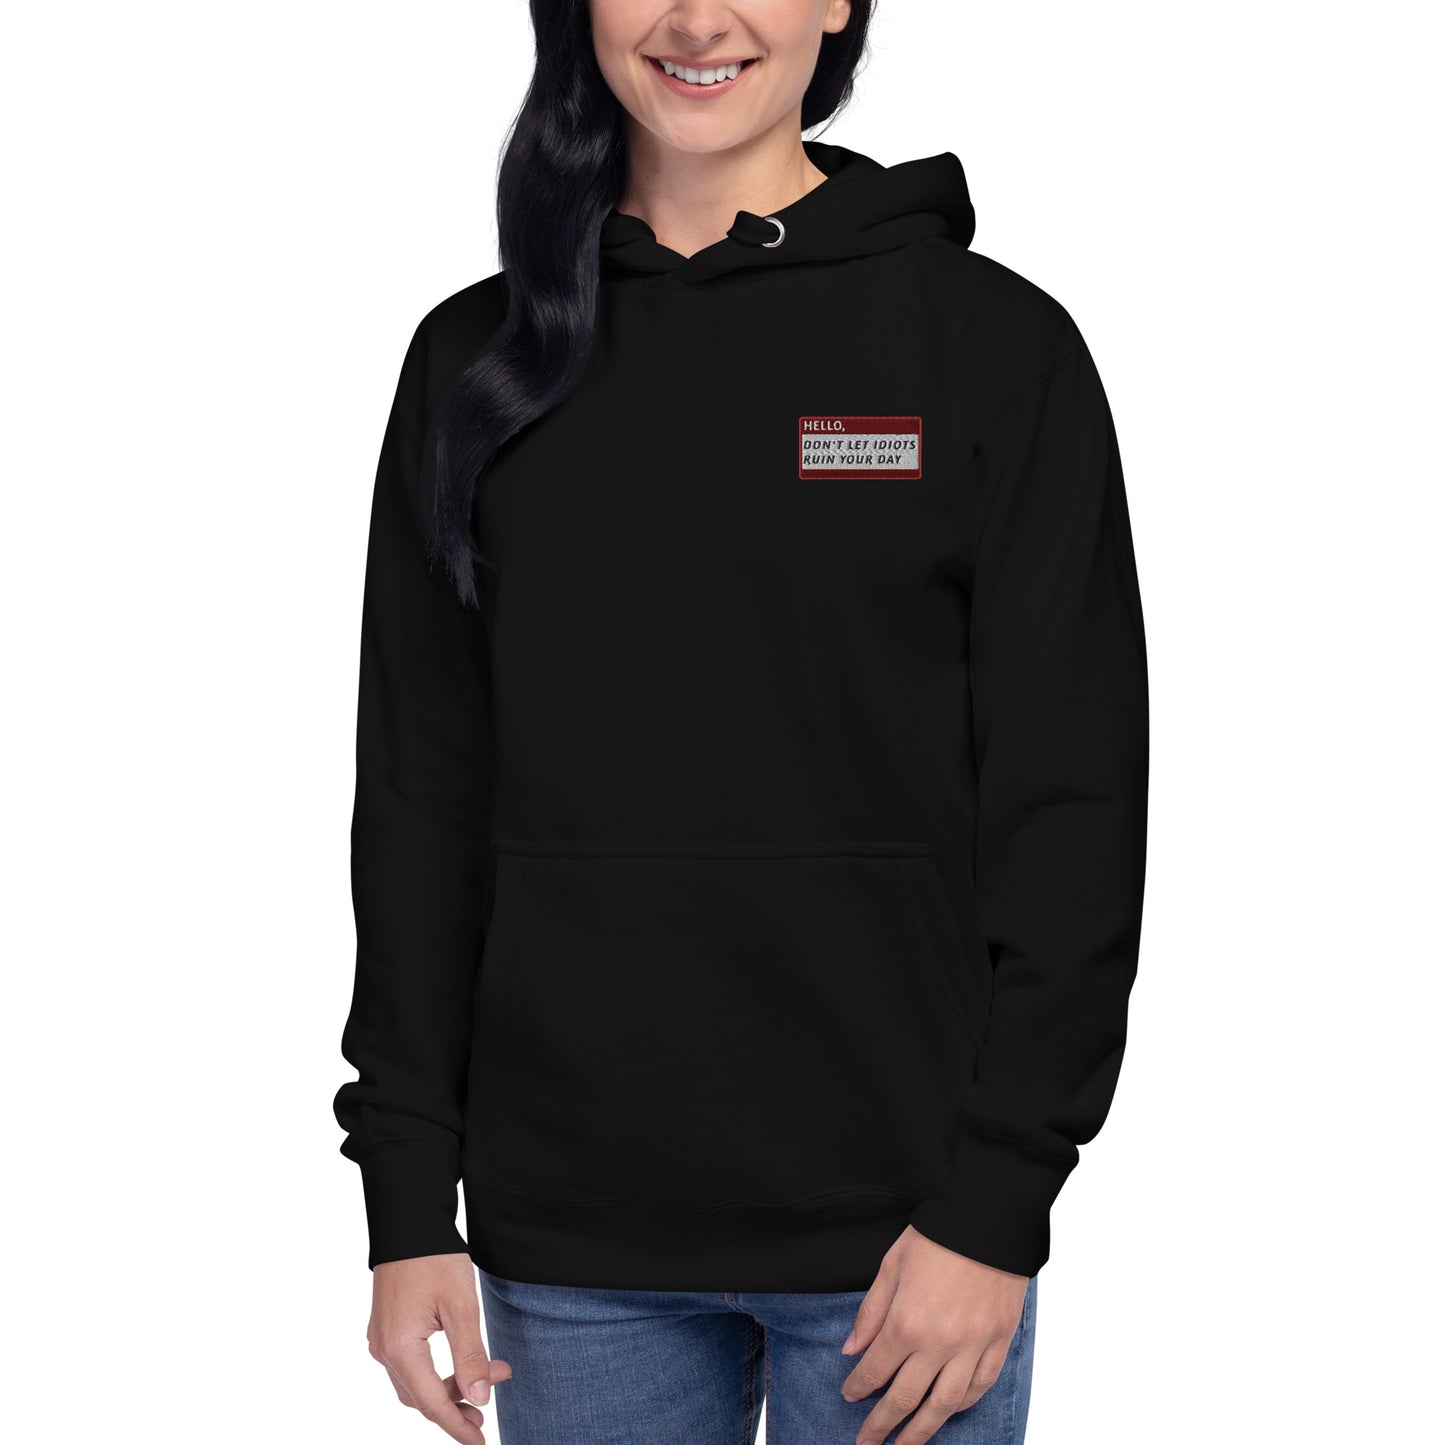 HELLO DON'T LET IDIOTS RUIN YOUR DAY - Name Tag Hoodie